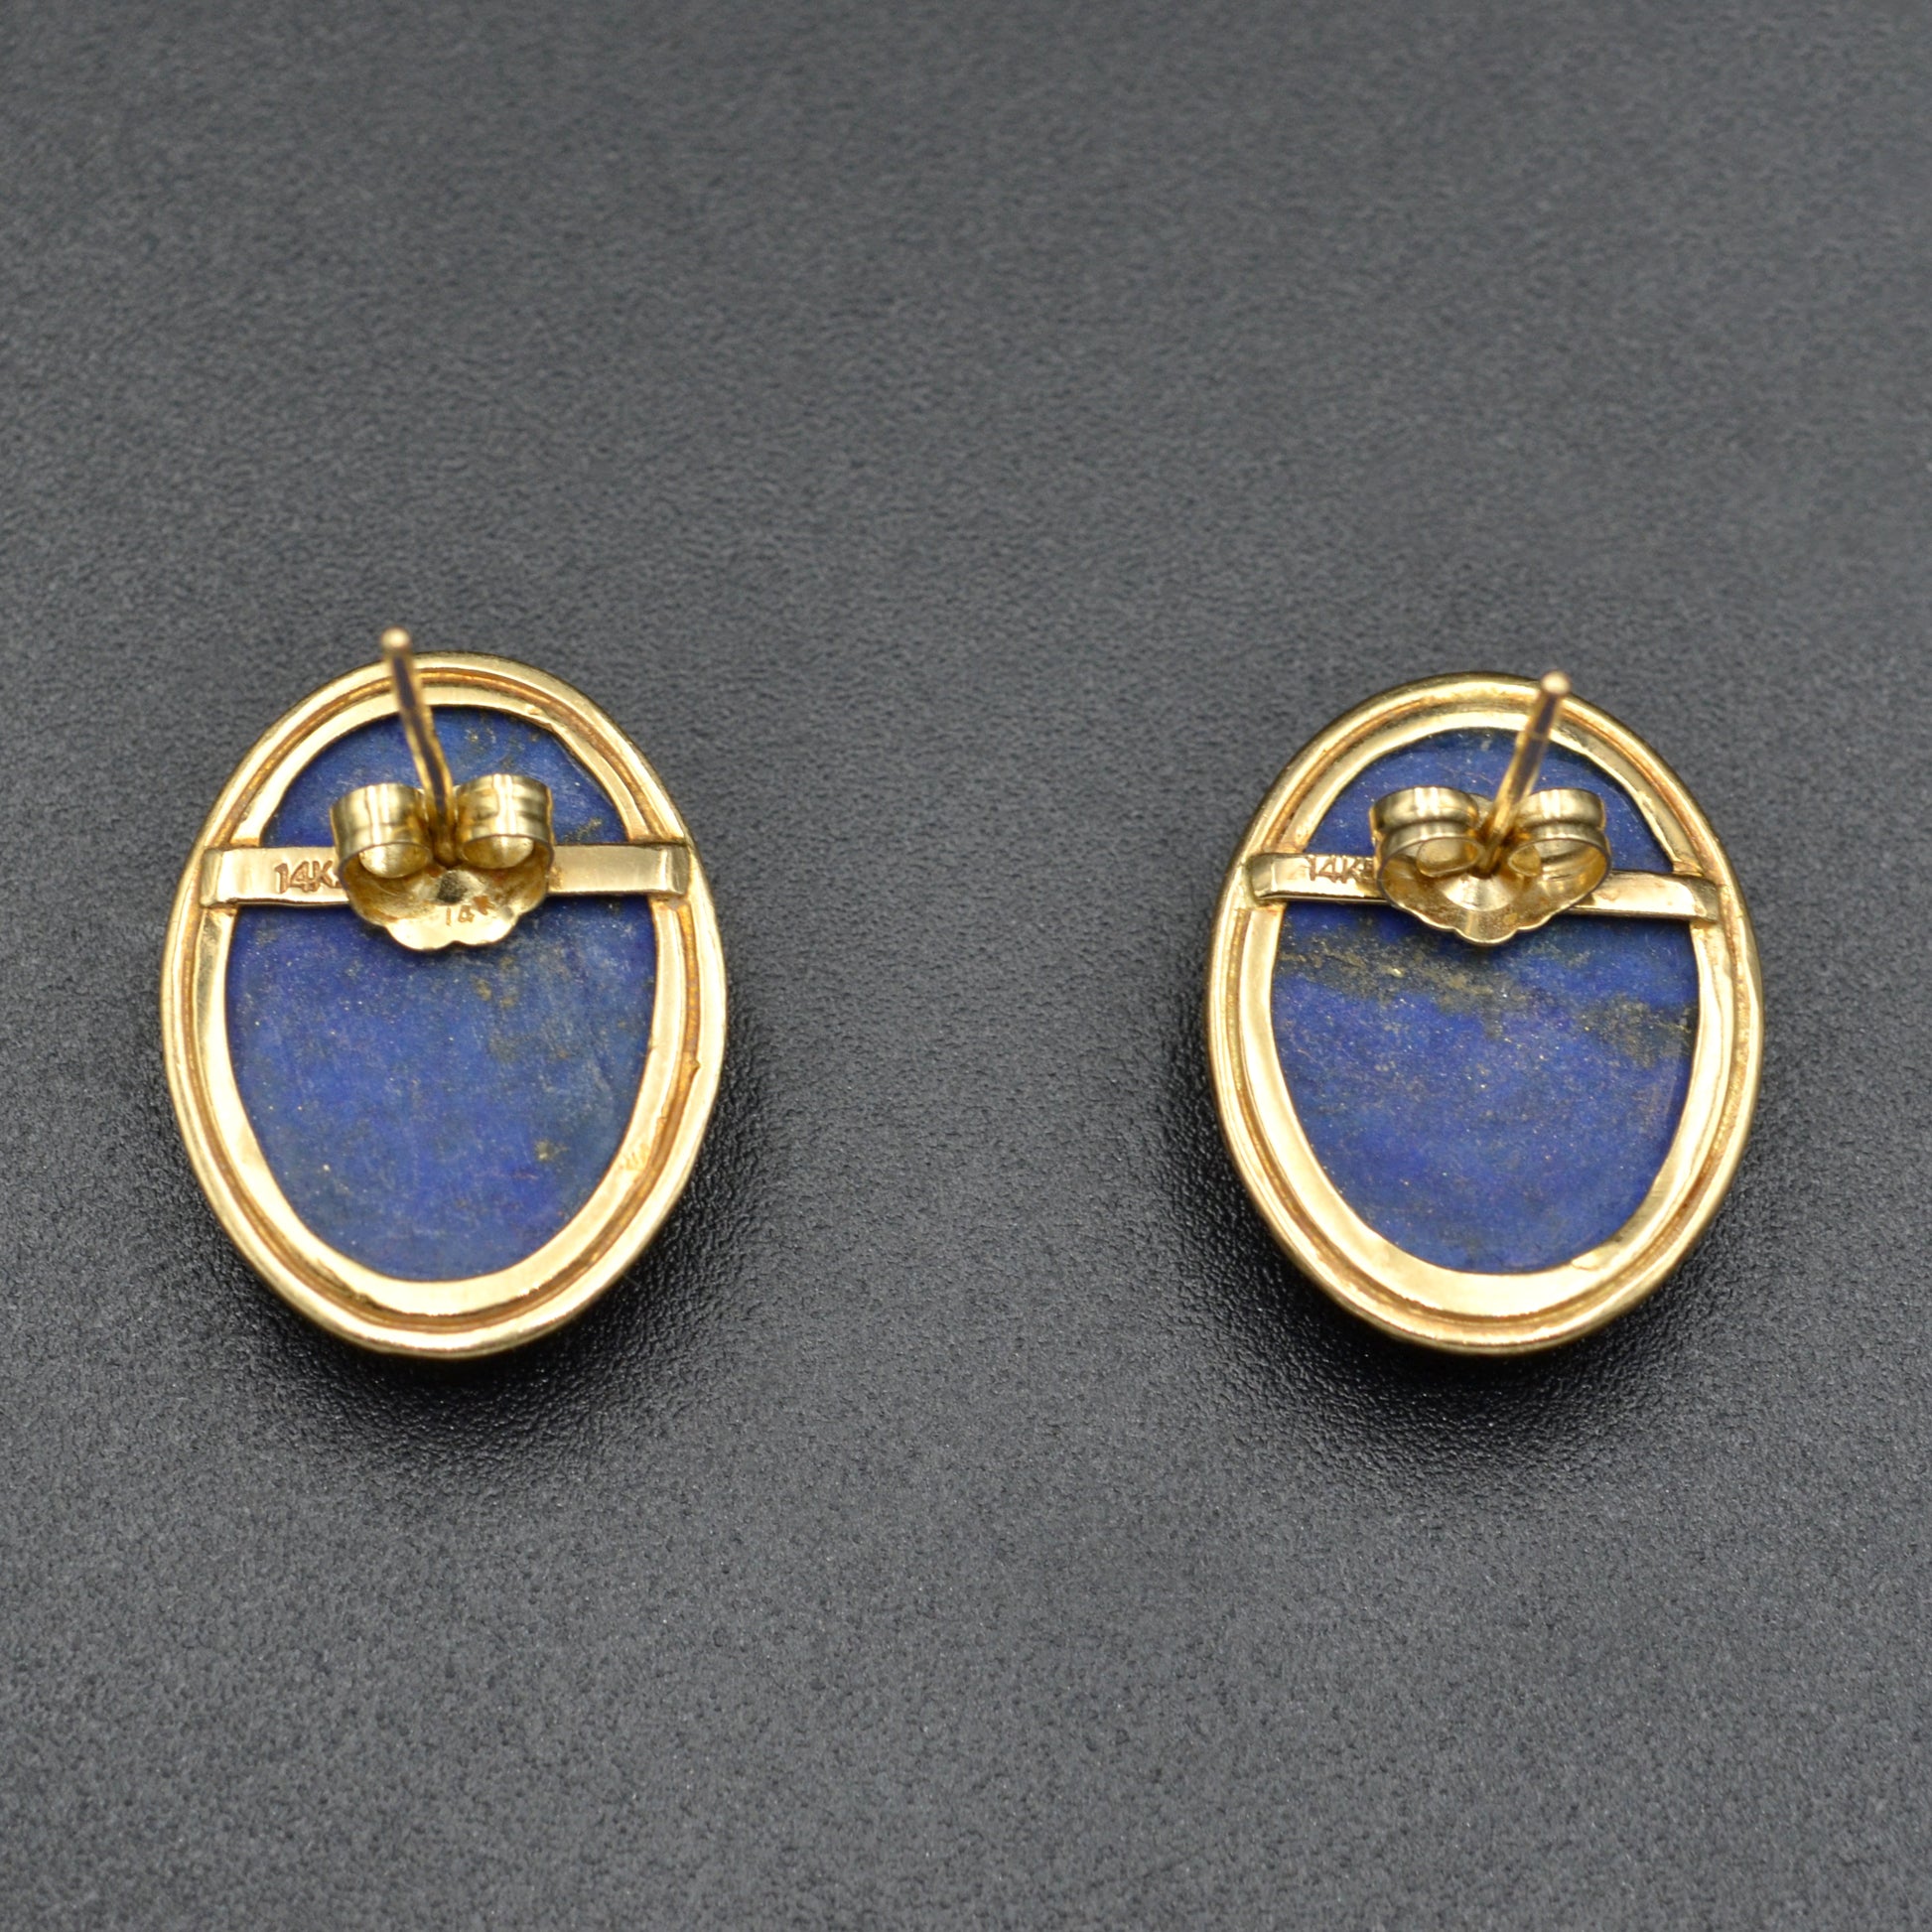 Vintage Lapis Lazuli and 14k Gold Earrings